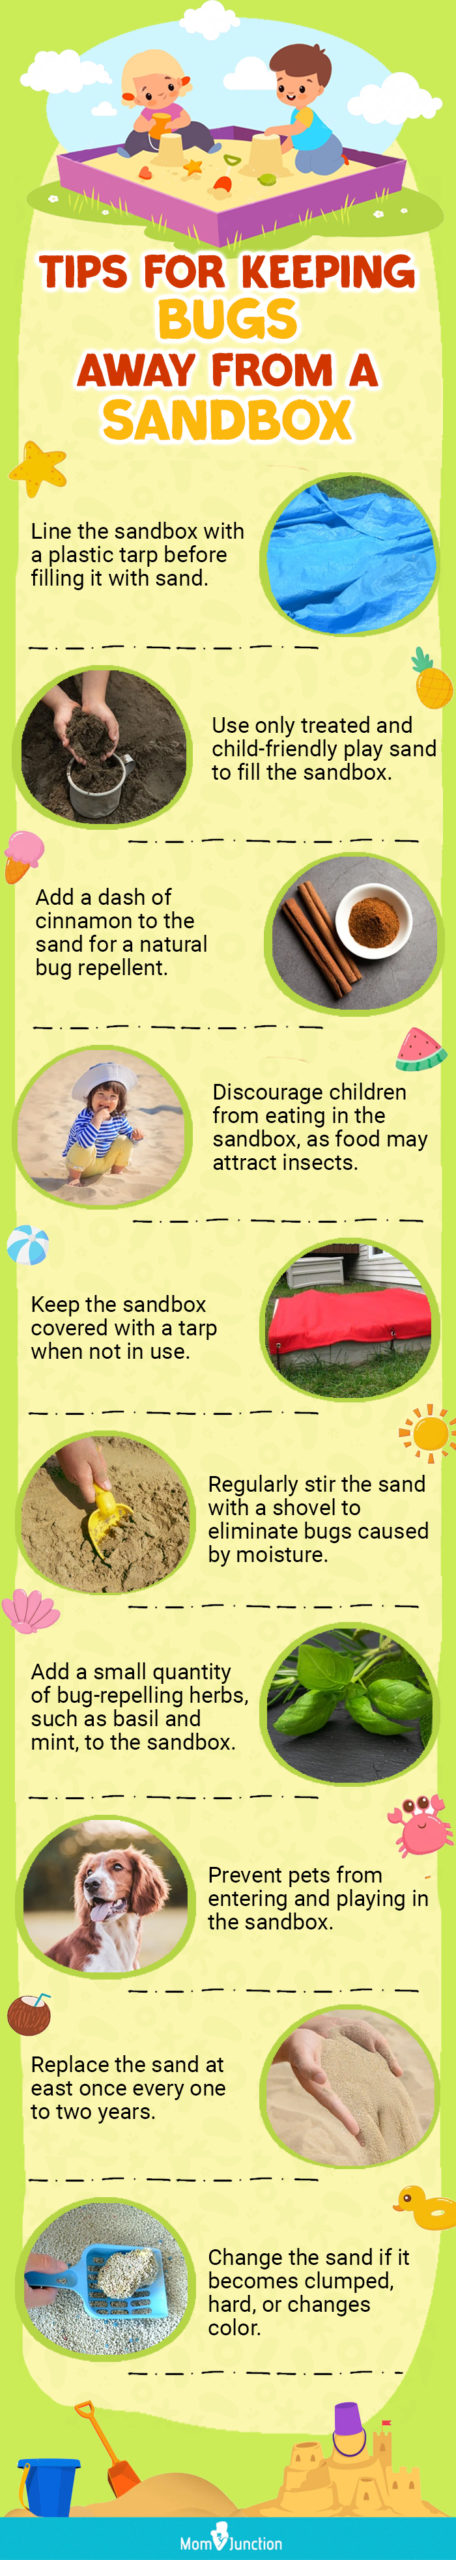 Tips For Keeping Bugs Away From A Sandbox (infographic)